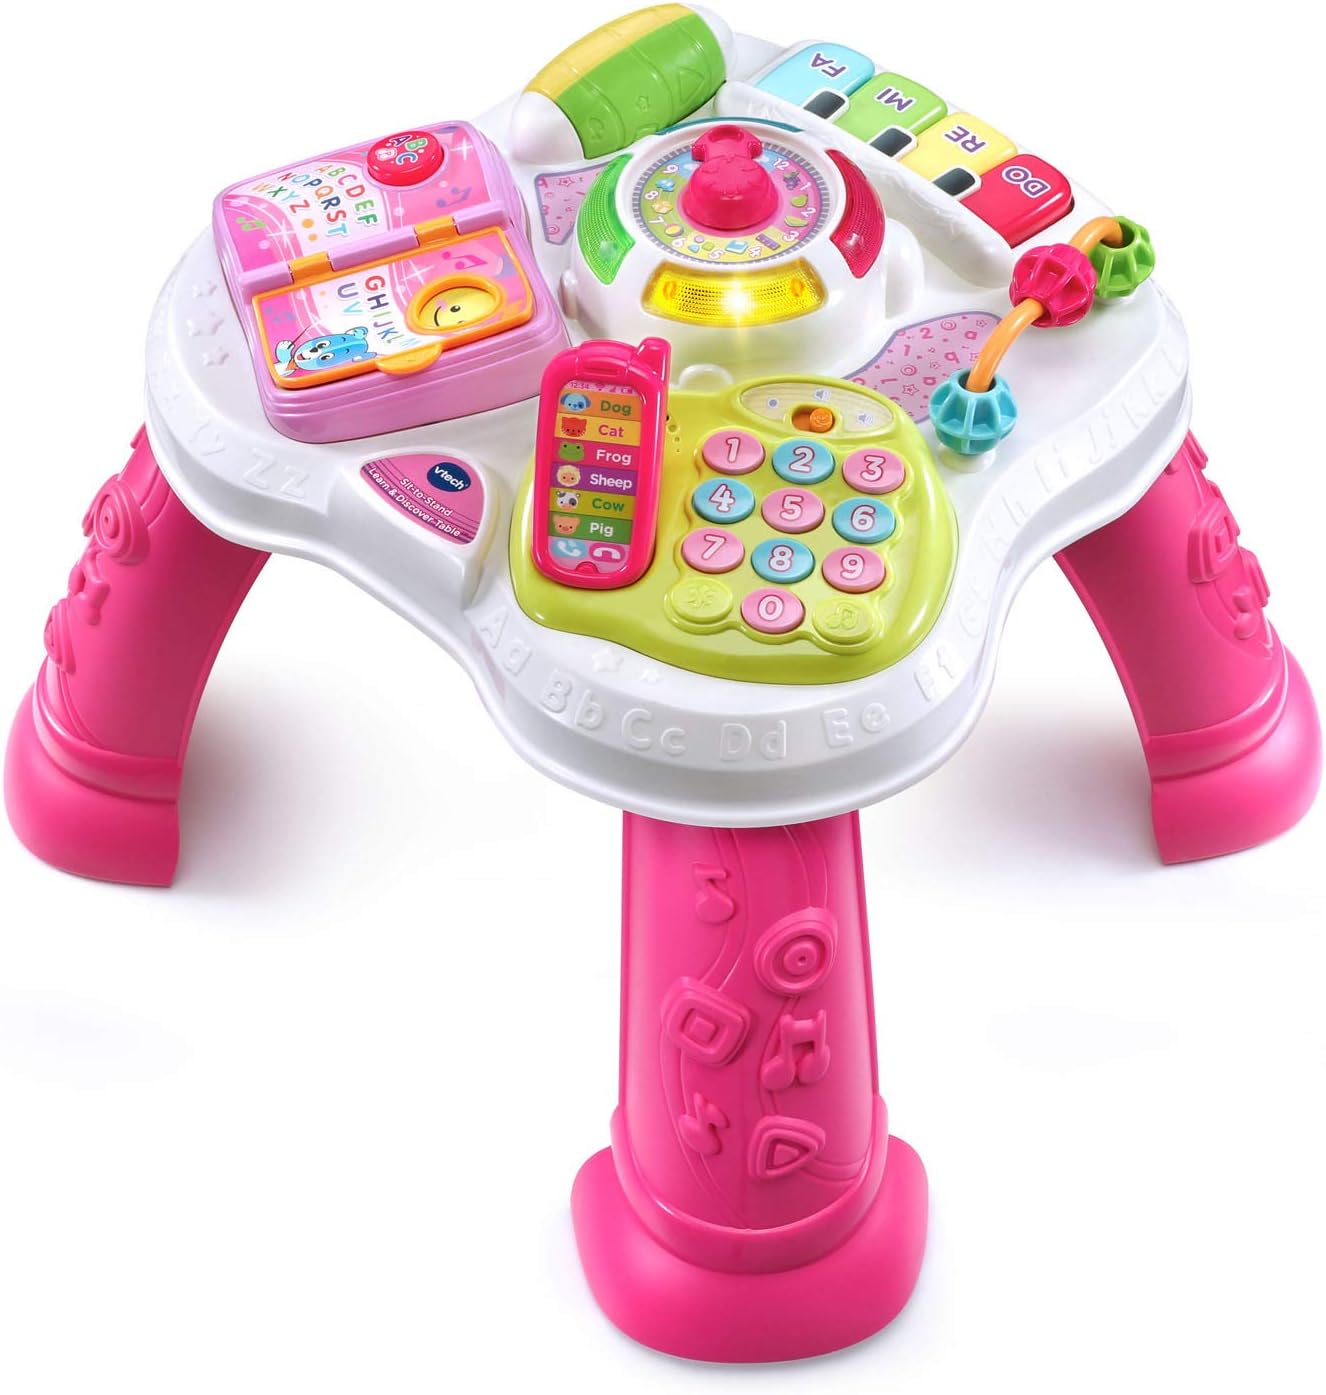 Vtech - Play & Learn Activity Table (Pink)